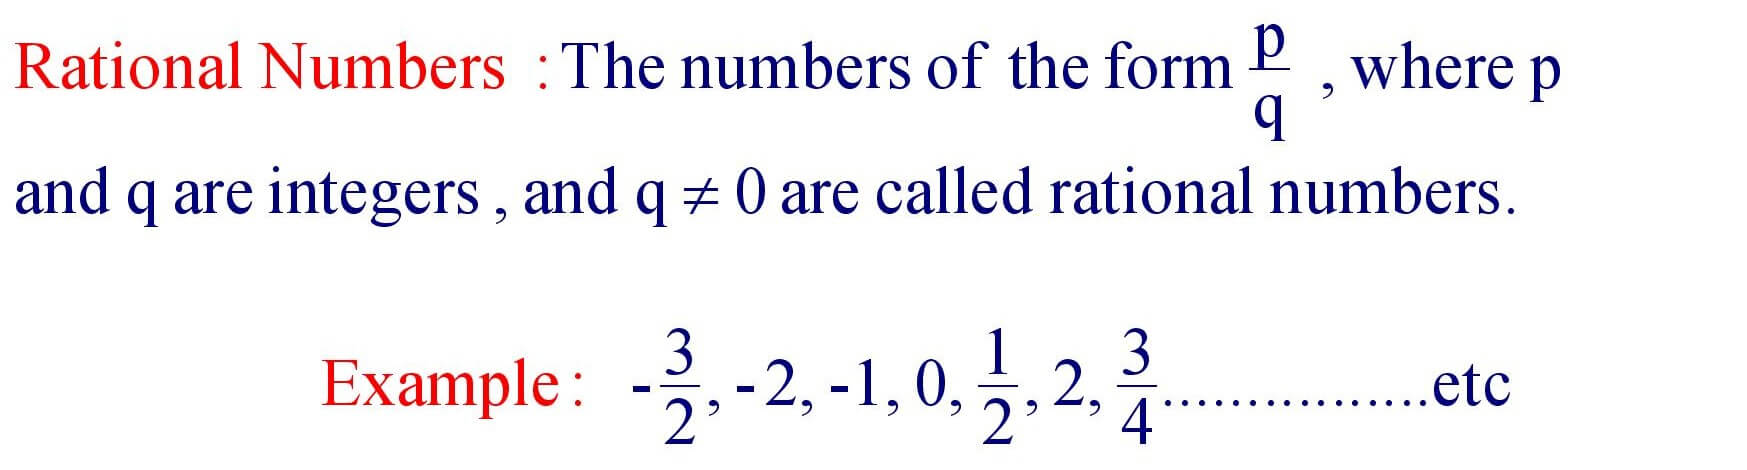 Rational Numbers Definition